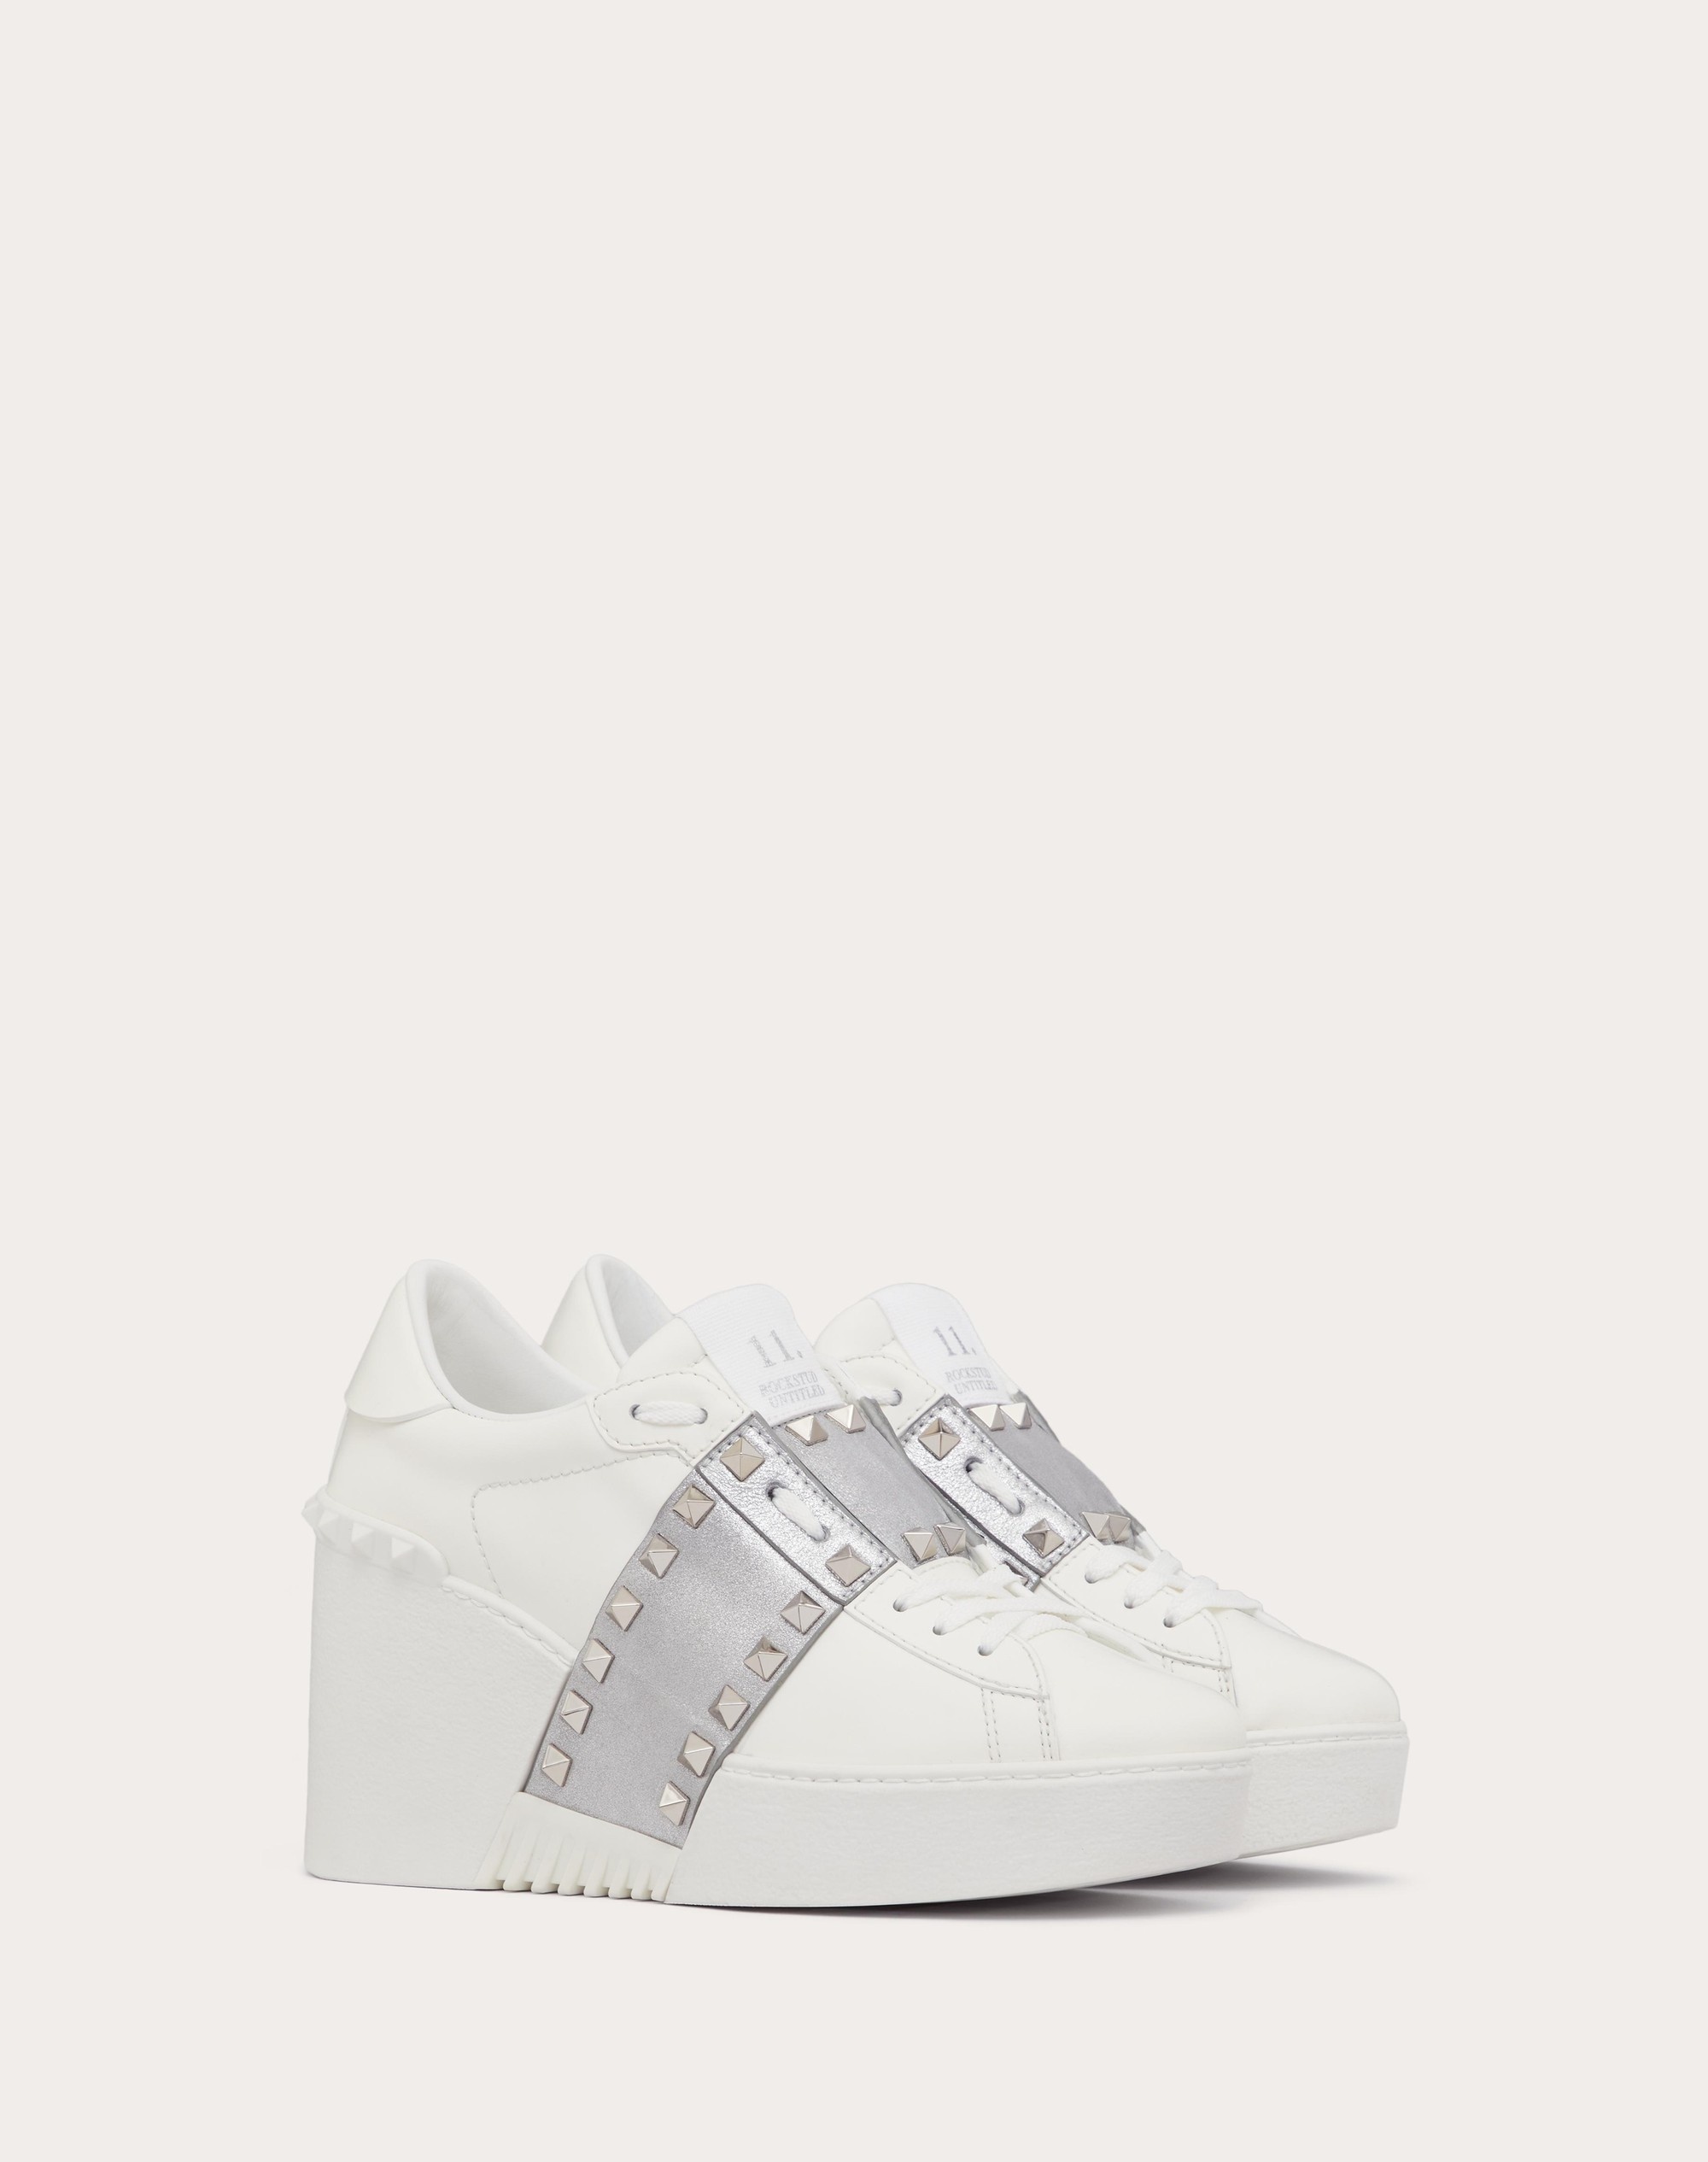 OPEN DISCO WEDGE SNEAKER IN CALFSKIN WITH METALLIC BAND AND MATCHING STUDS 85MM - 2